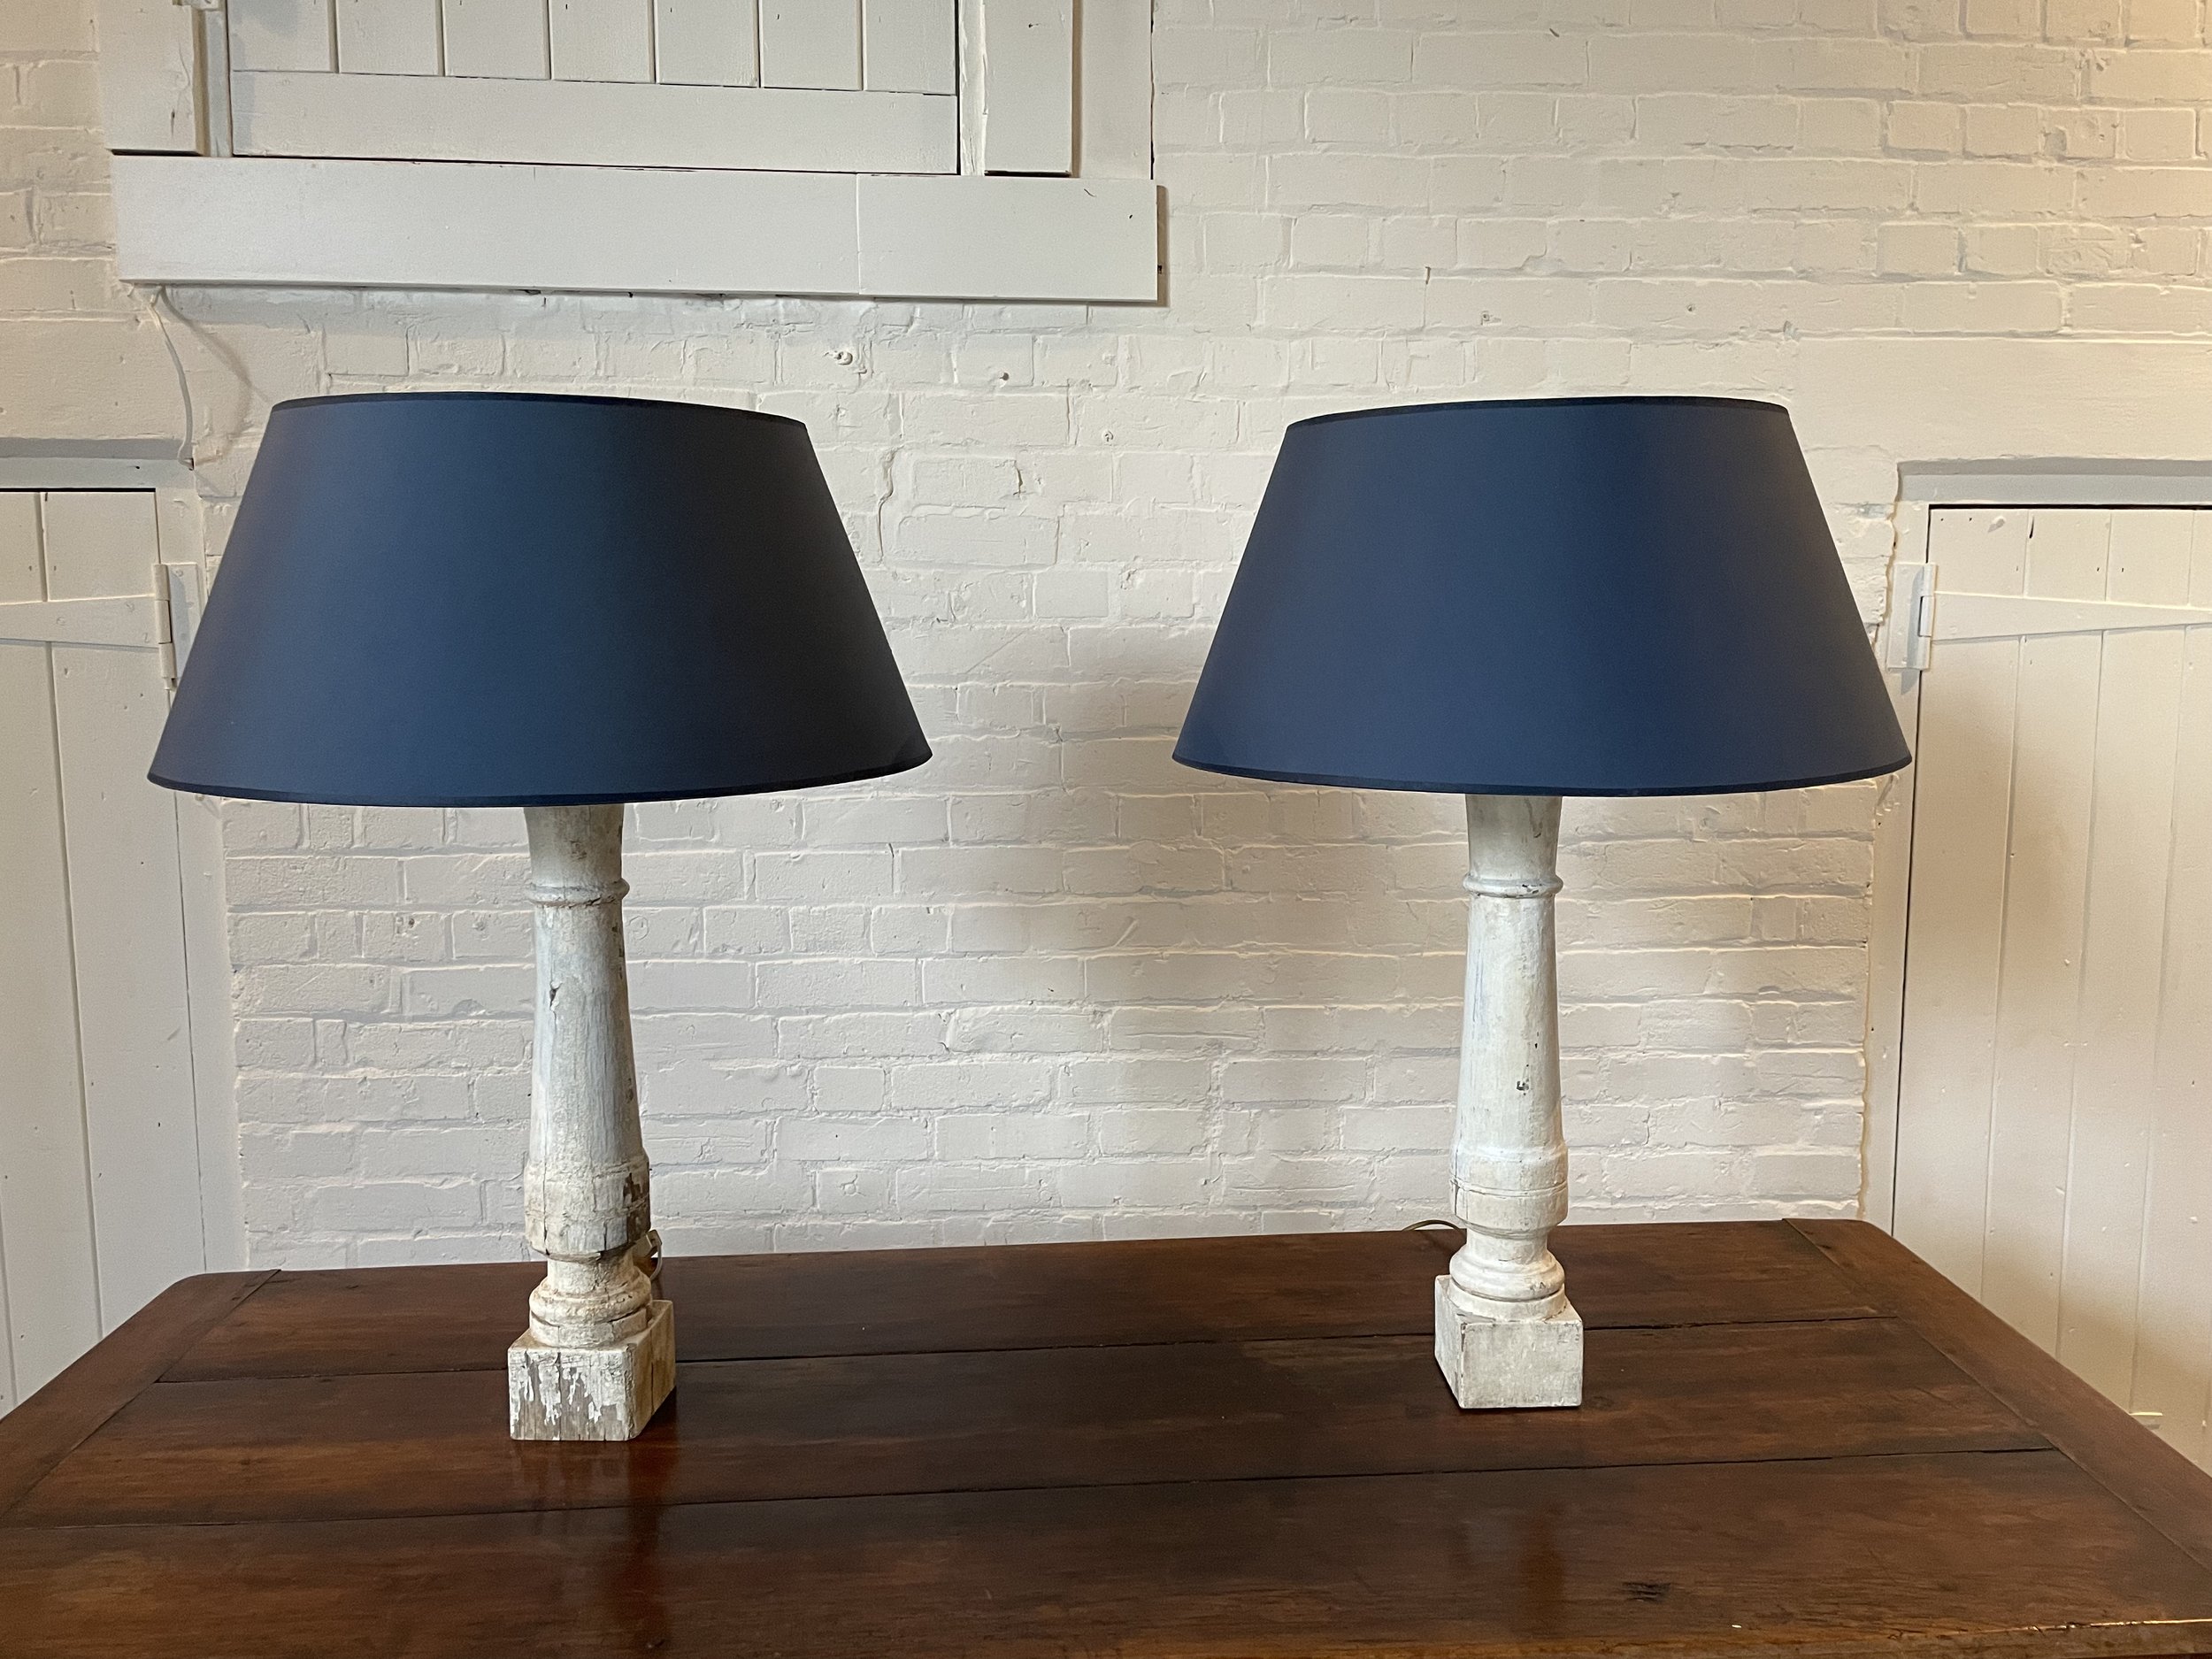 Pair of Table Lamps - £650